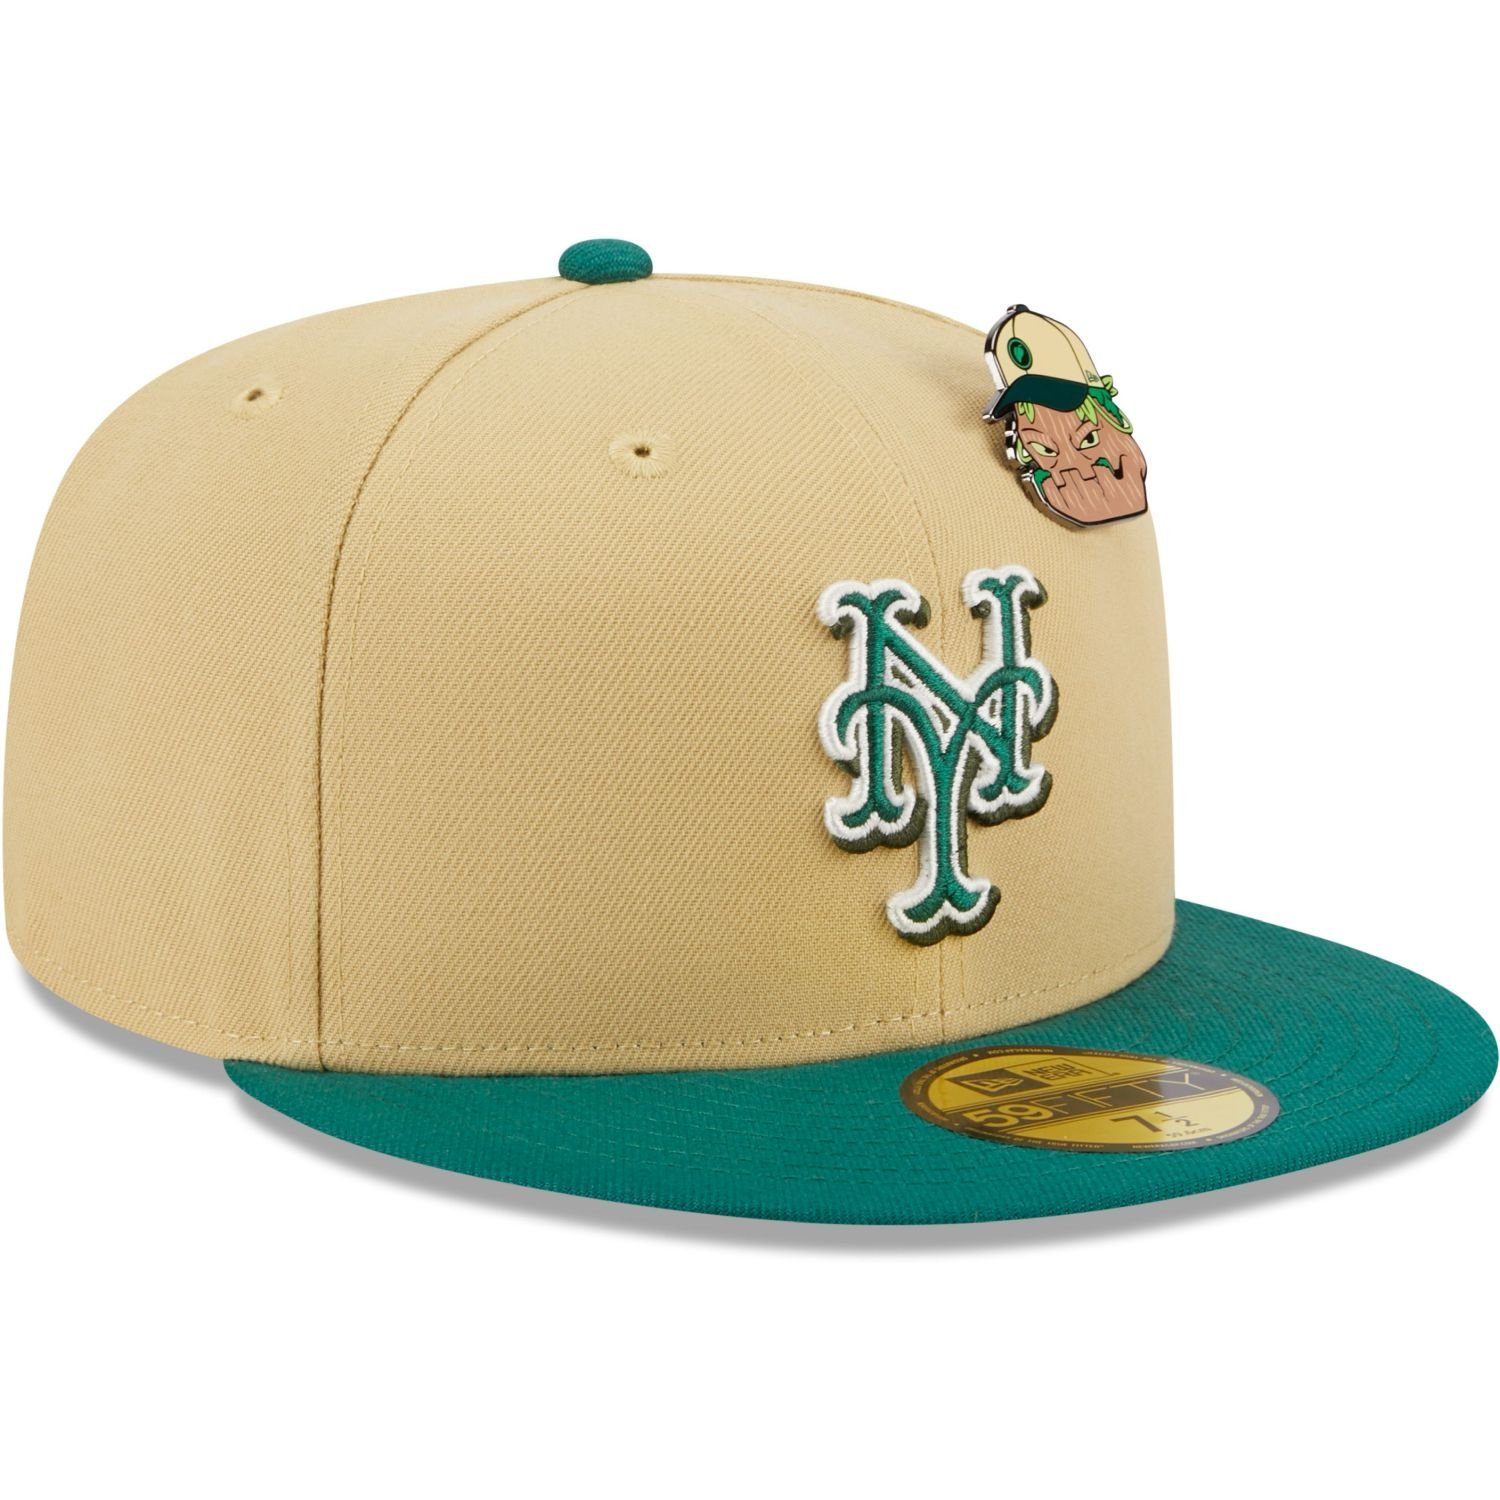 New Era Fitted ELEMENTS New Cap Mets 59Fifty York PIN